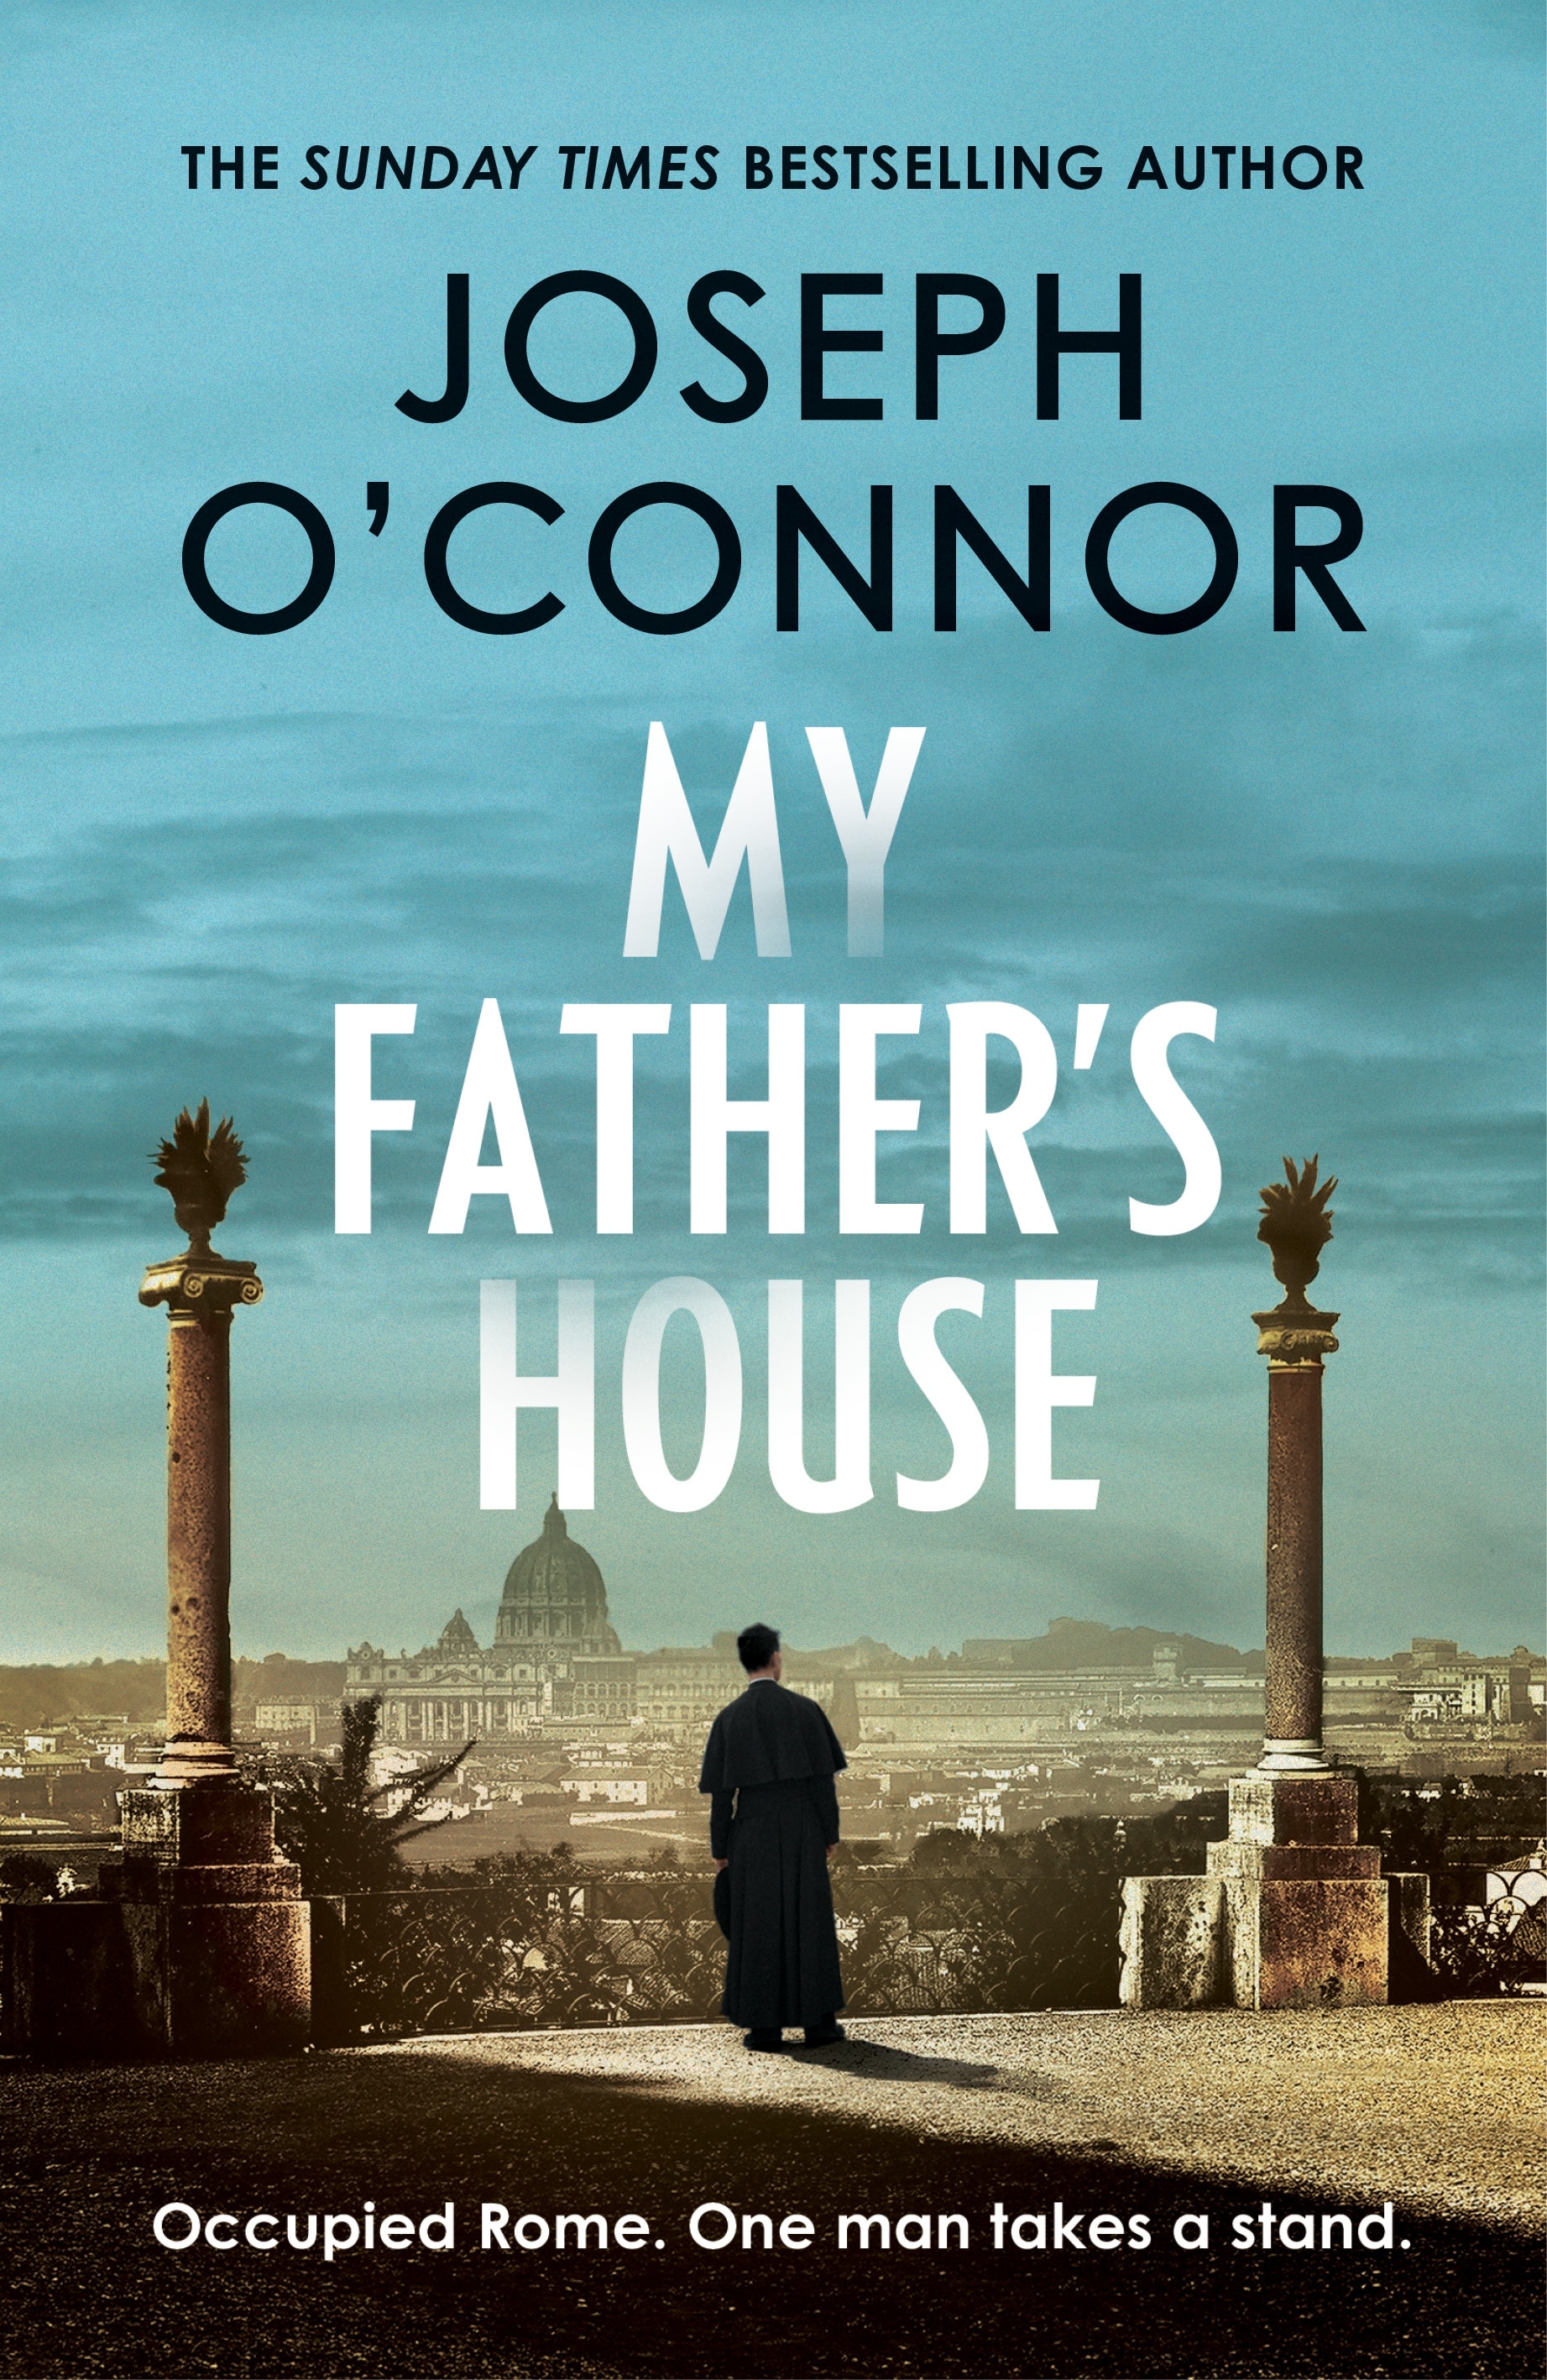 Book “My Father's House” by Joseph O'Connor — January 26, 2023